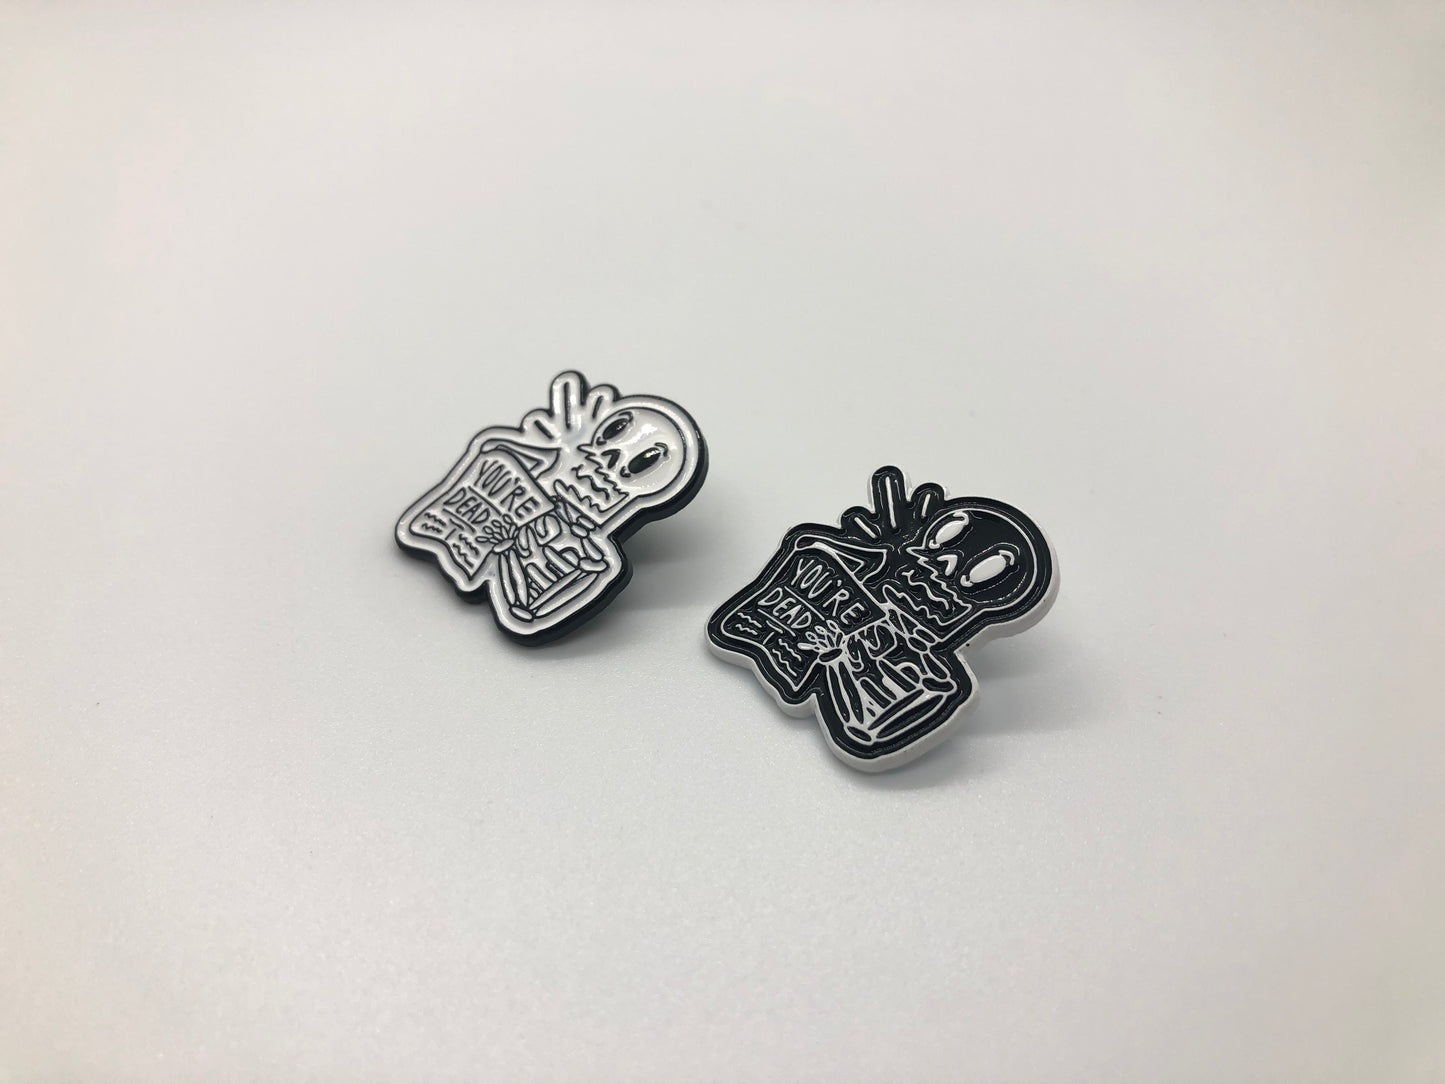 “You’re Dead!” - My Chemical Romance inspired enamel pin